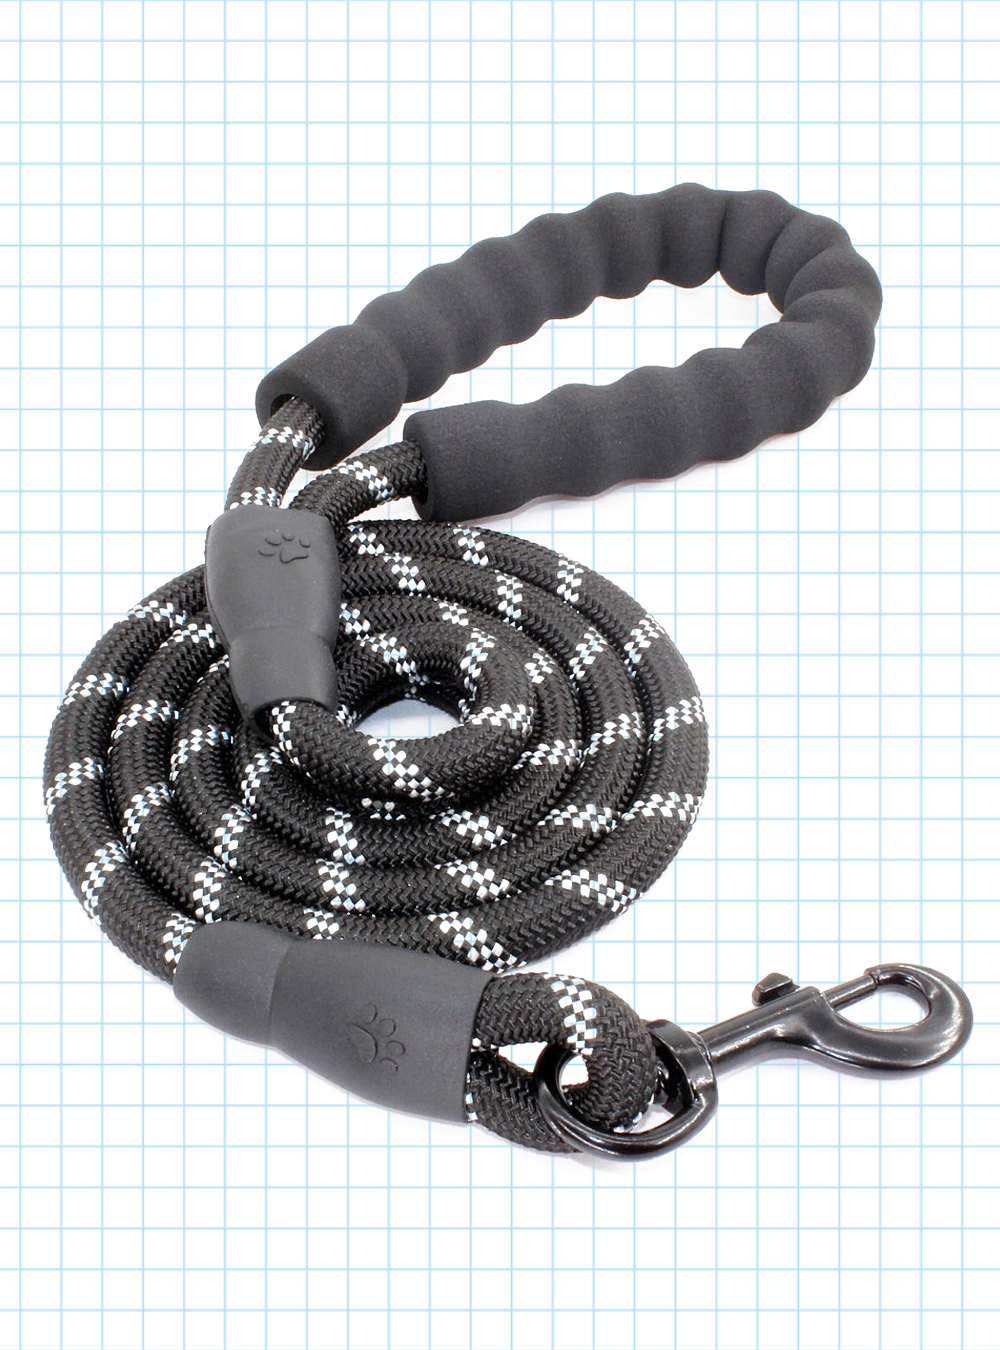 10 Best Dog Leashes - Top-Rated Dog 